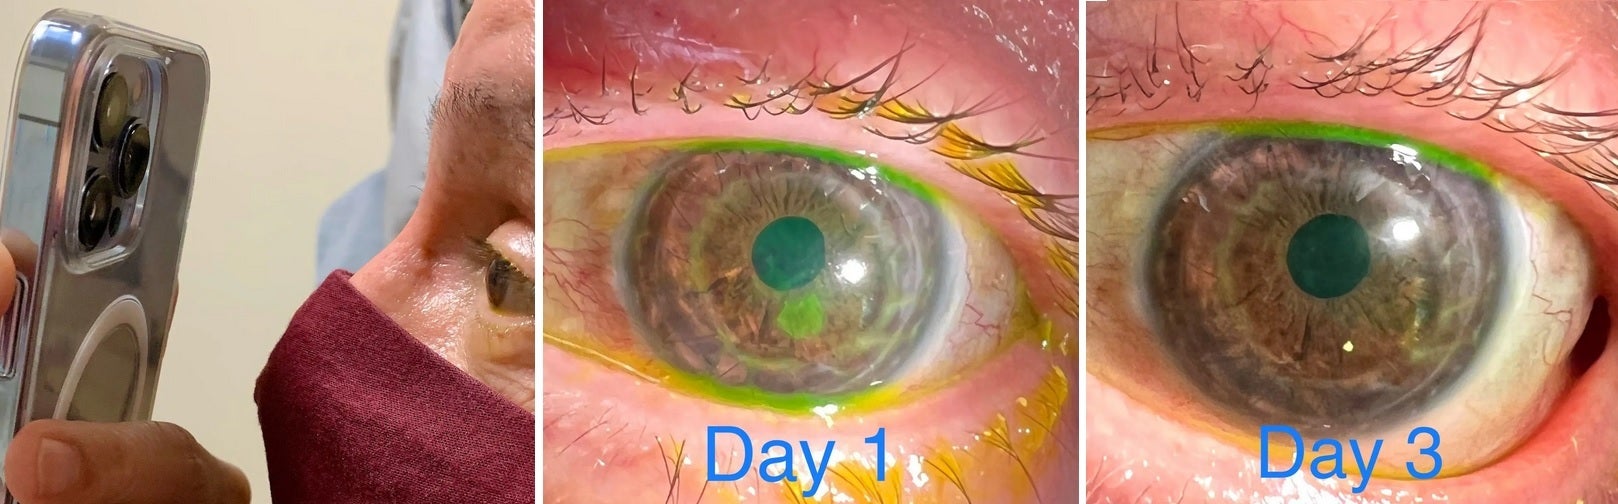 Opthamologist Tommy Korn uses the Macro mode on the iPhone 13 Pro Max to treat a patient with corneal abrasions - Doctor uses 5G iPhone 13 Pro&#039;s Macro mode to examine patients&#039; eyes